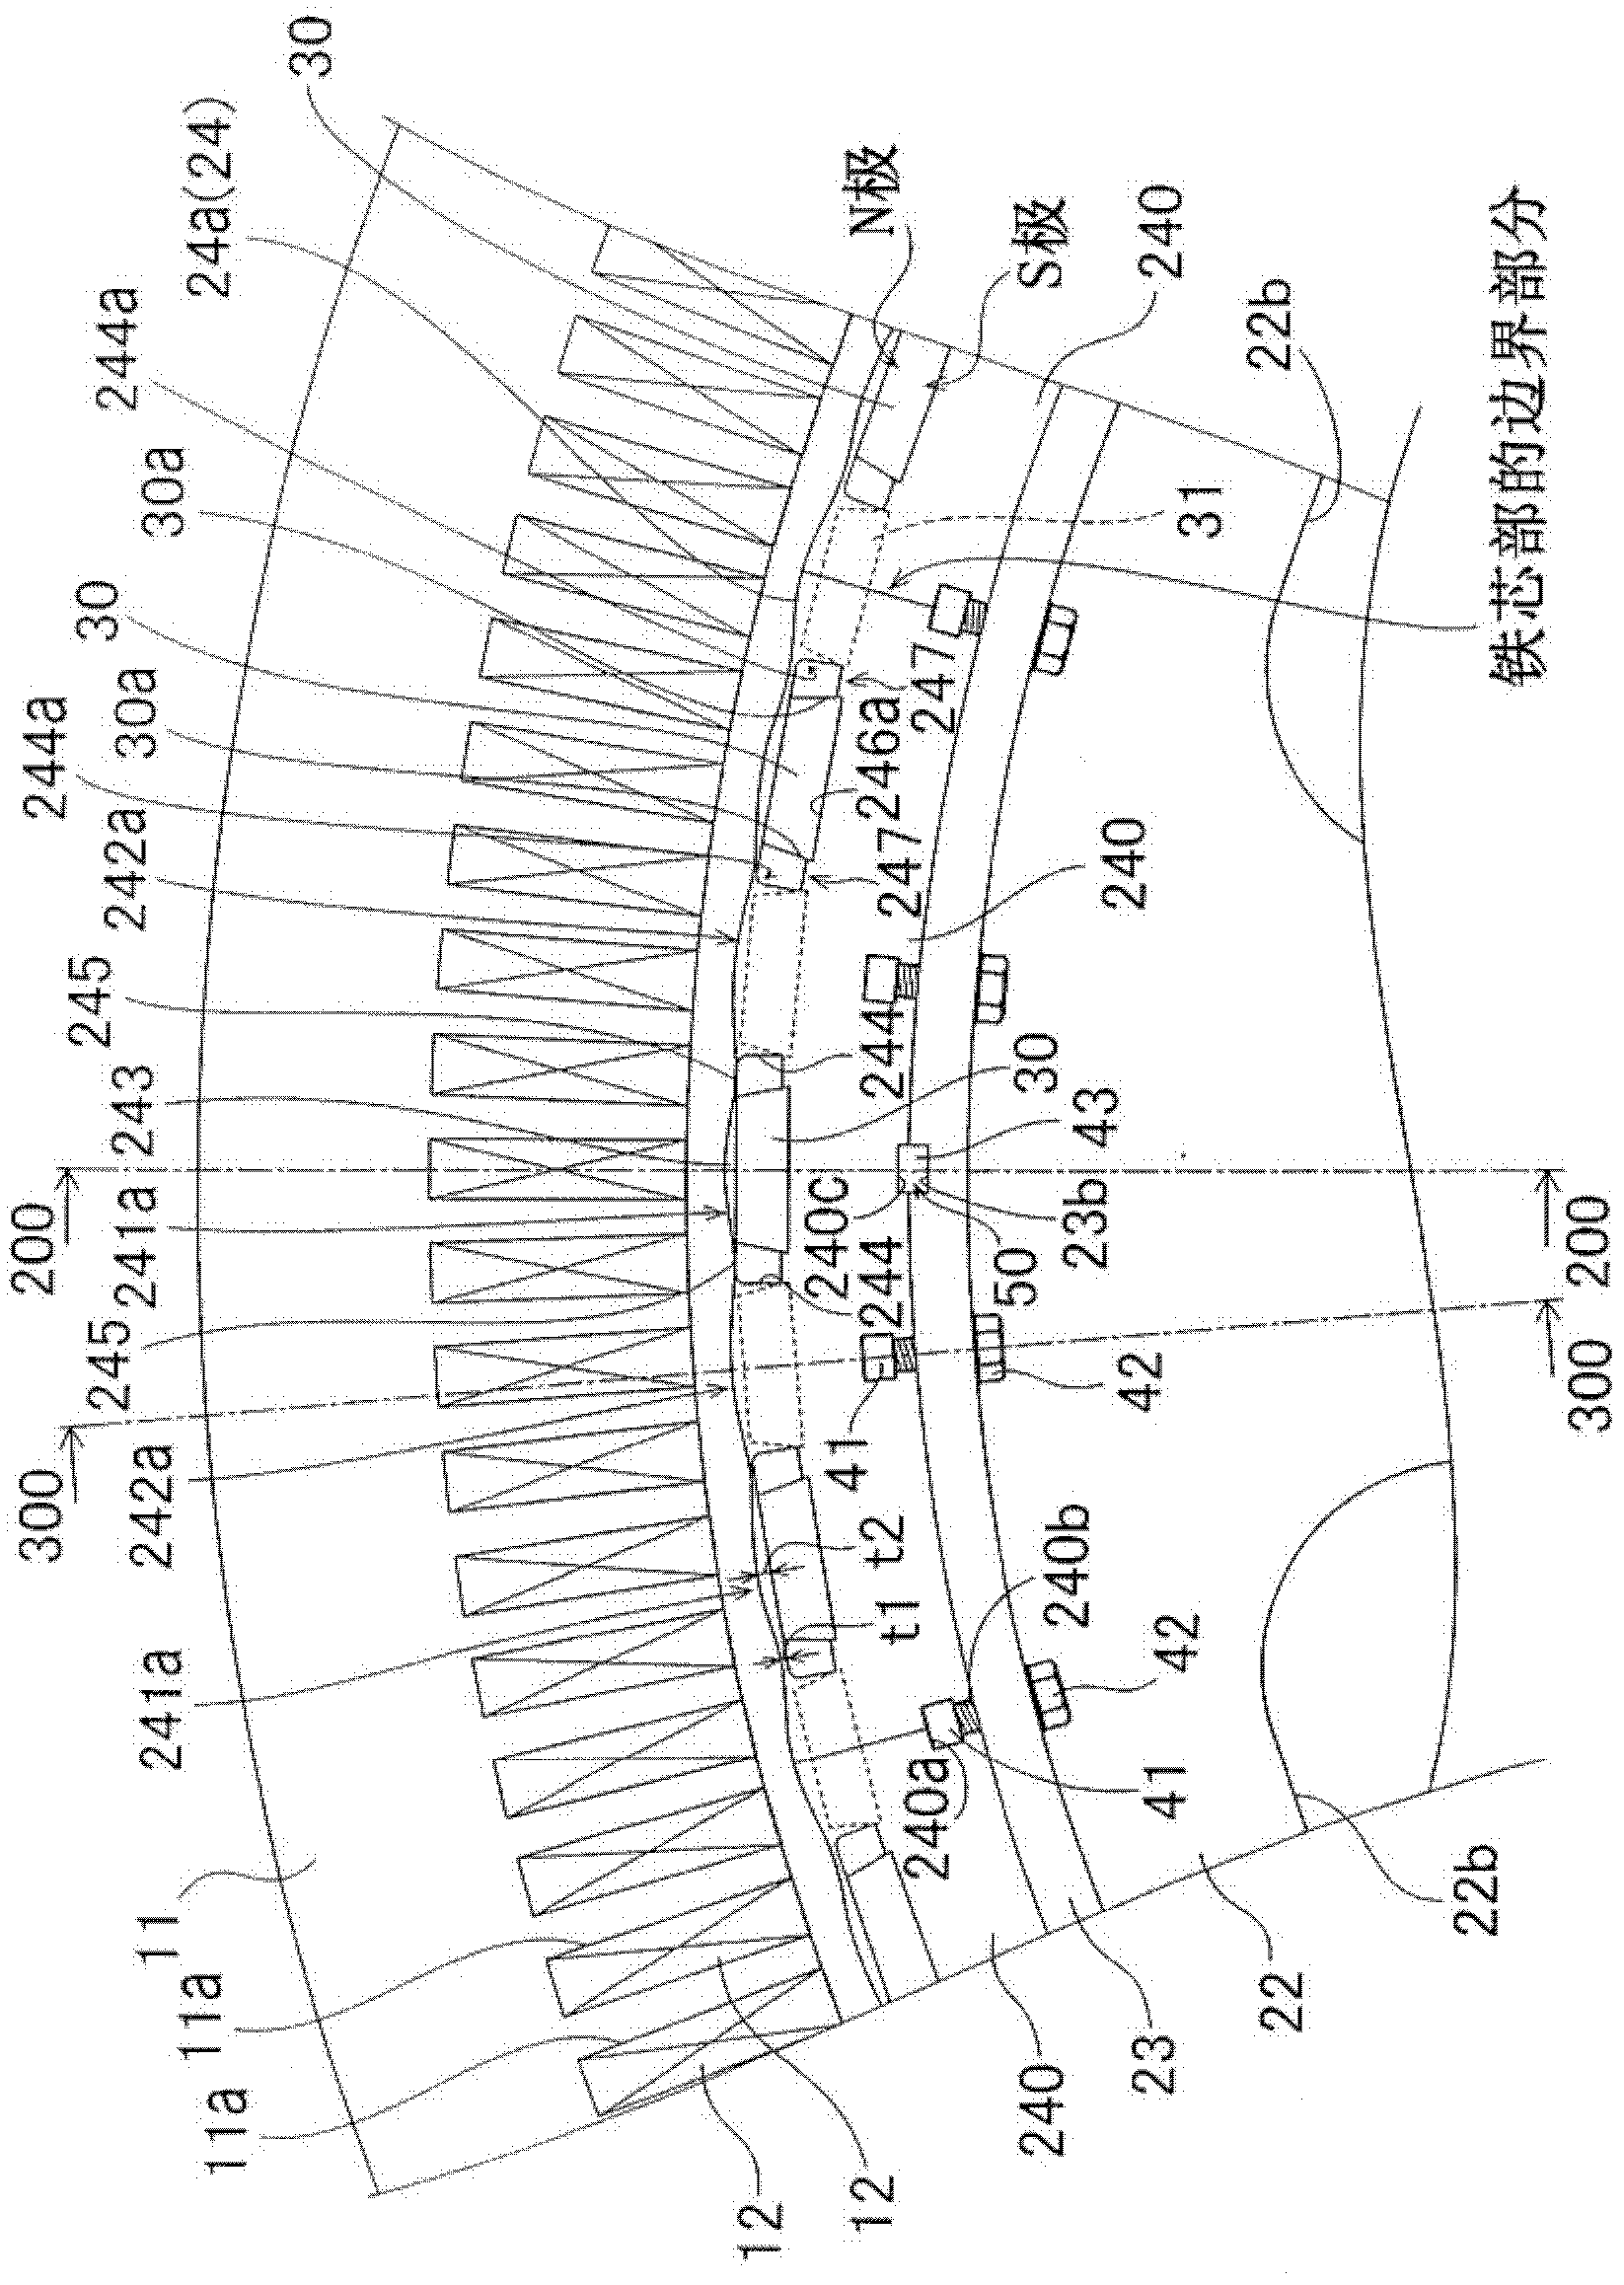 Rotating electric machine and wind power generation system